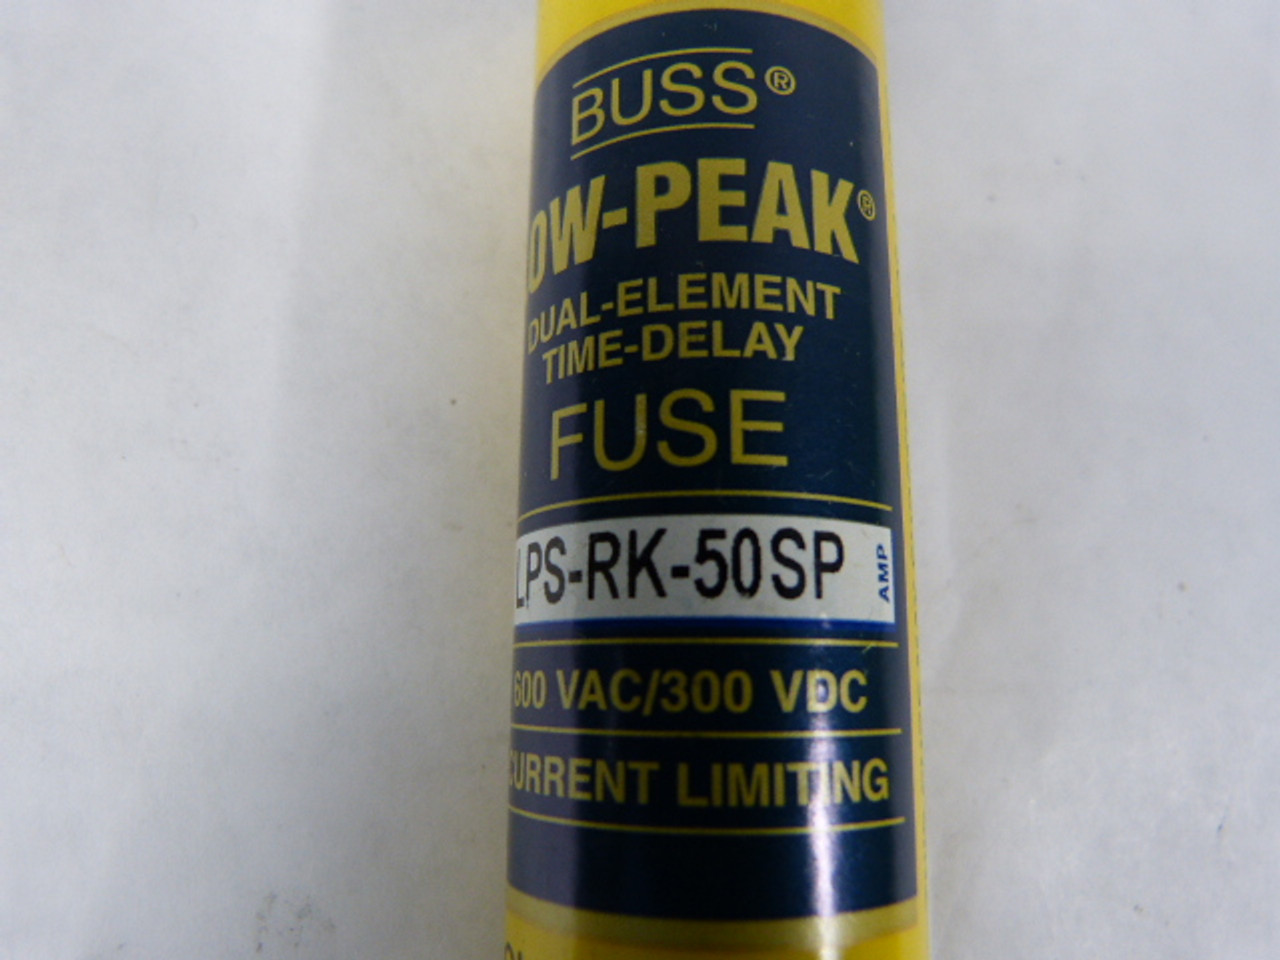 Low-Peak LPS-RK-50SP Dual Element Time Delay Fuse 50A 600V USED